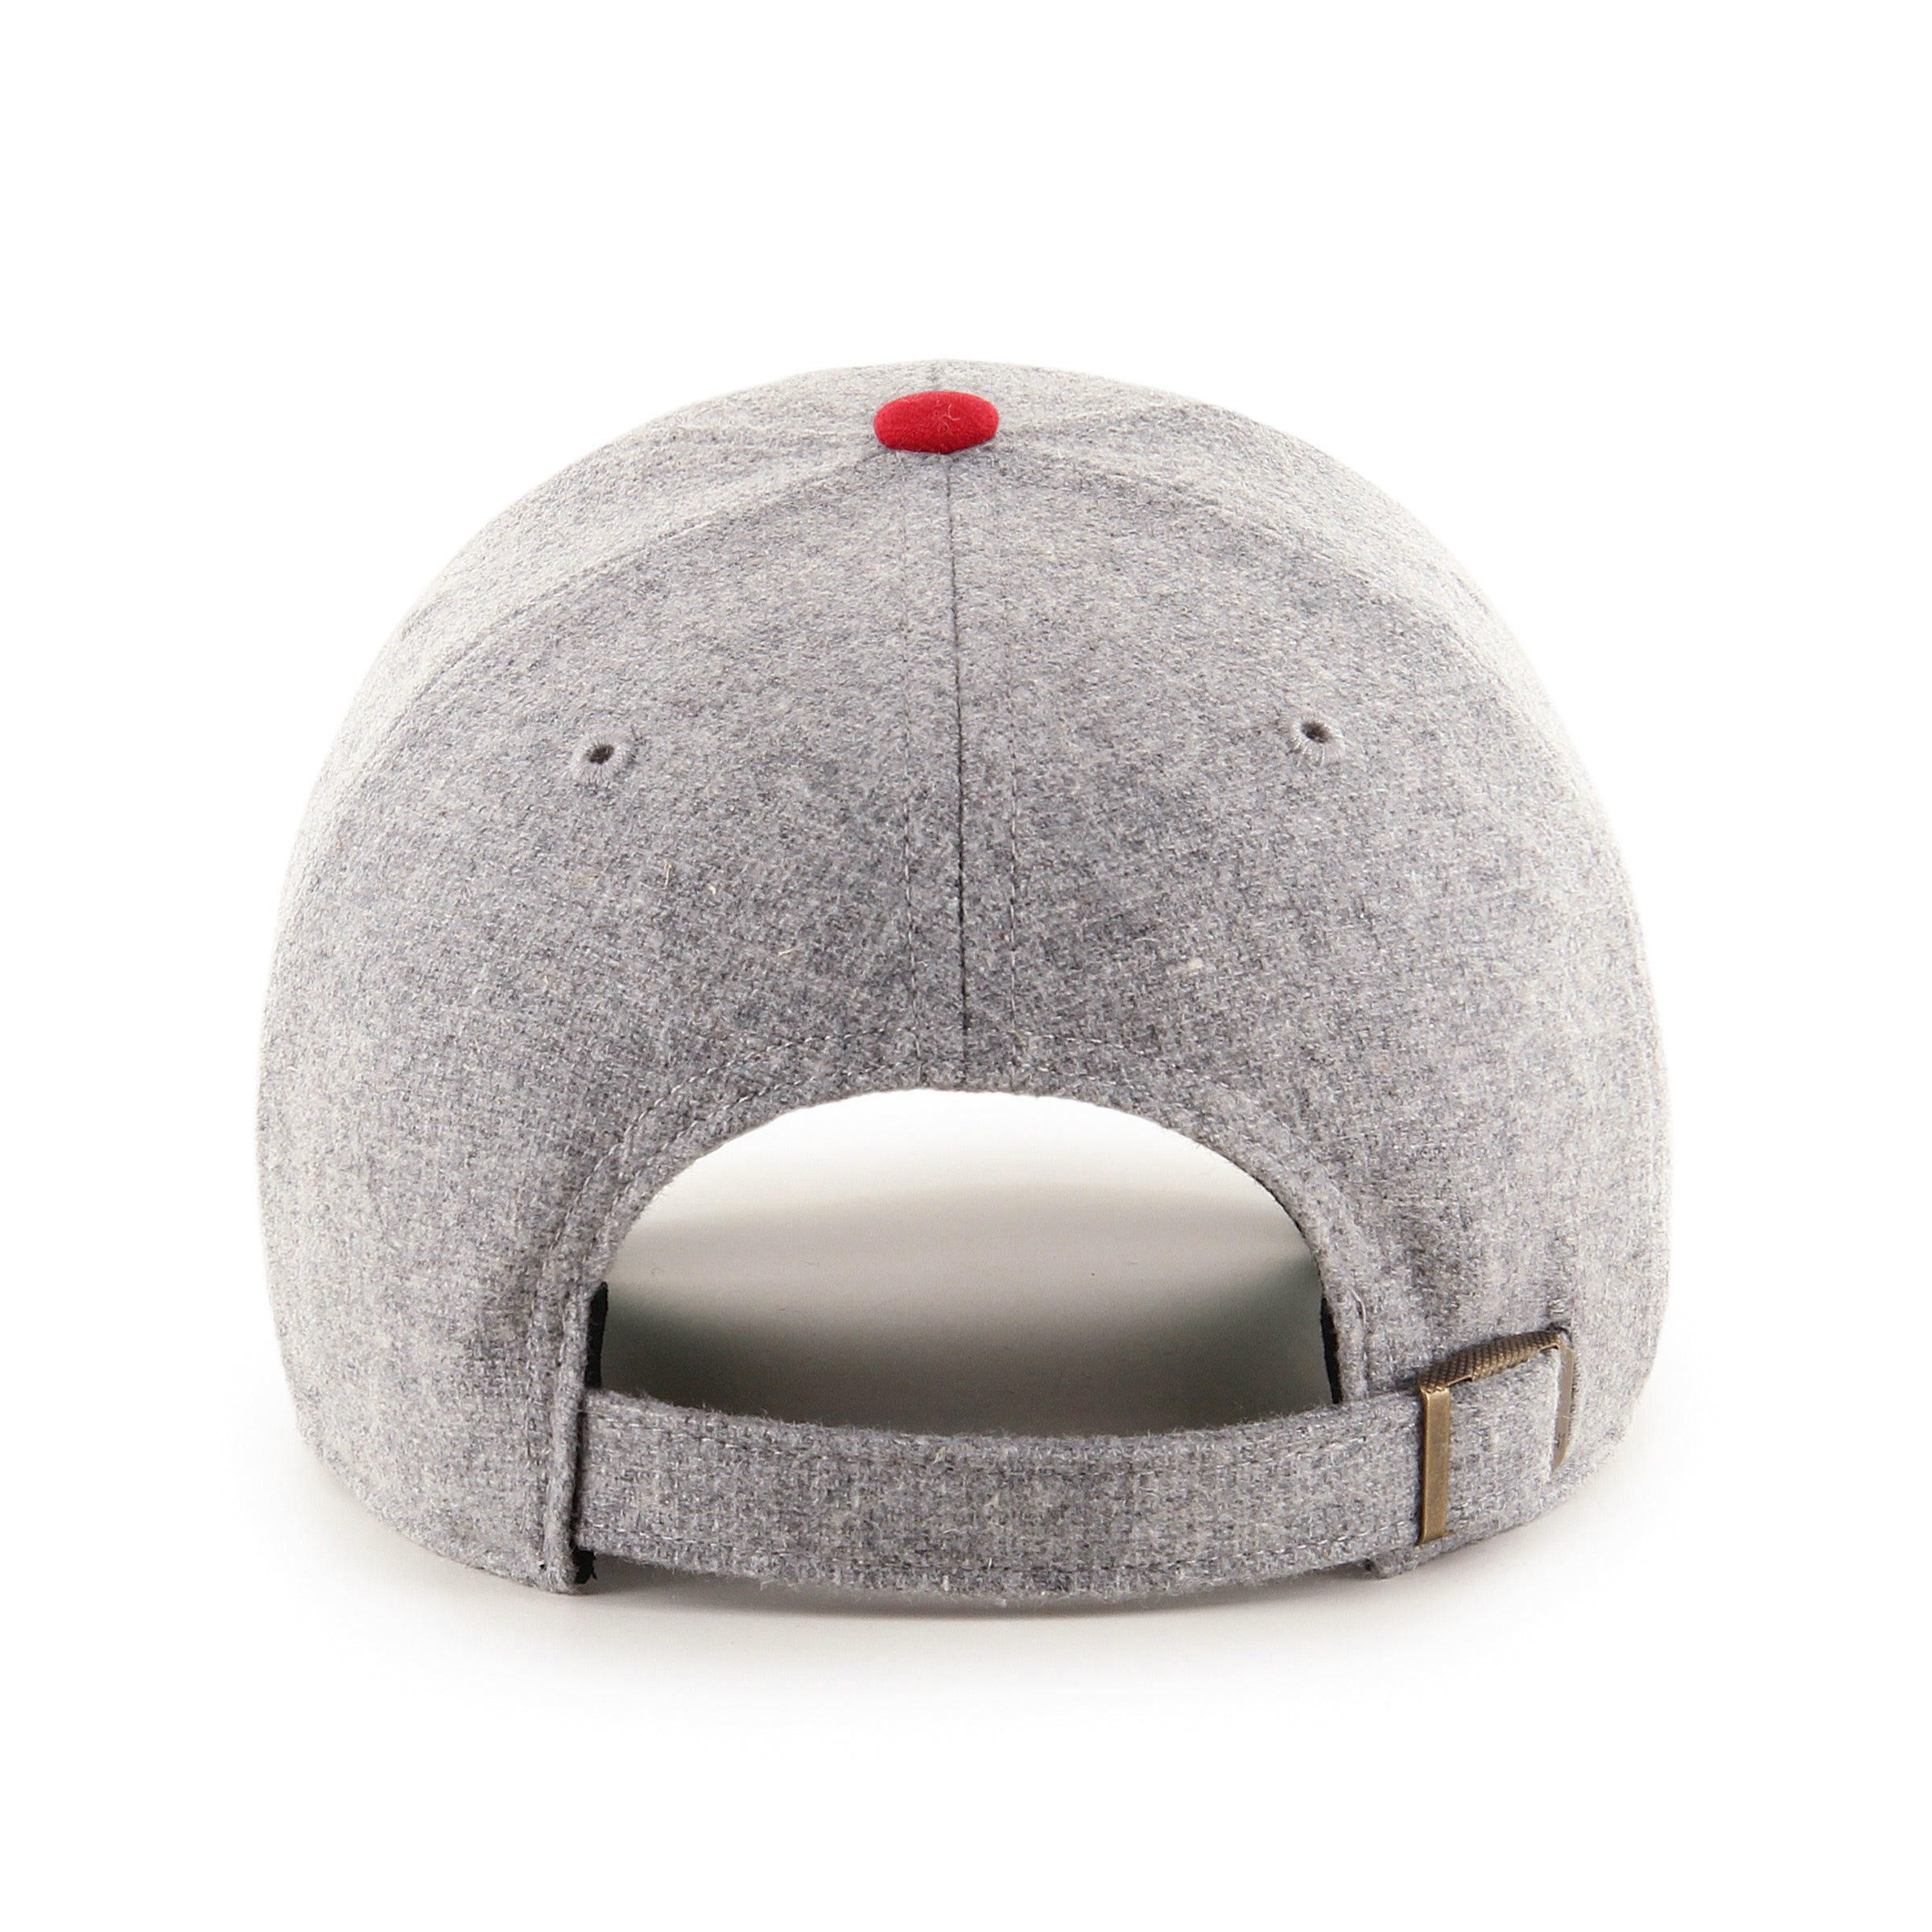 '47 Adjustable Gray and Red Phillies Cap